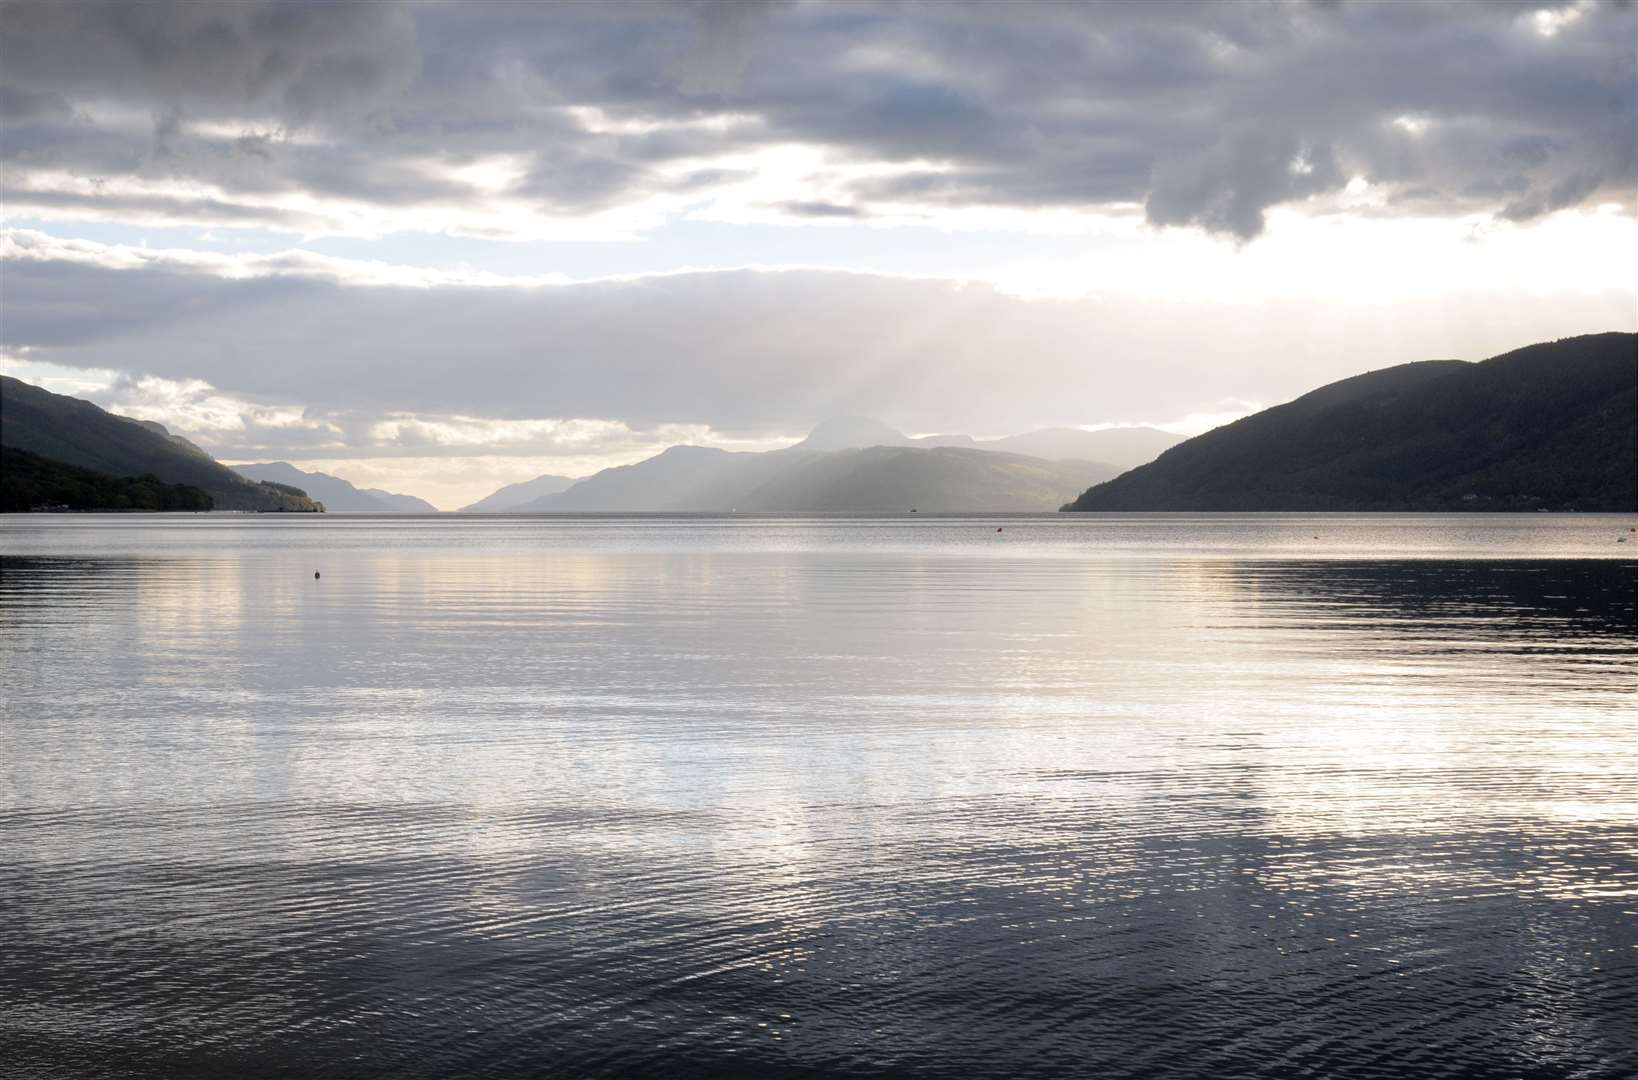 Will thousands of people descend on Loch Ness this weekend?